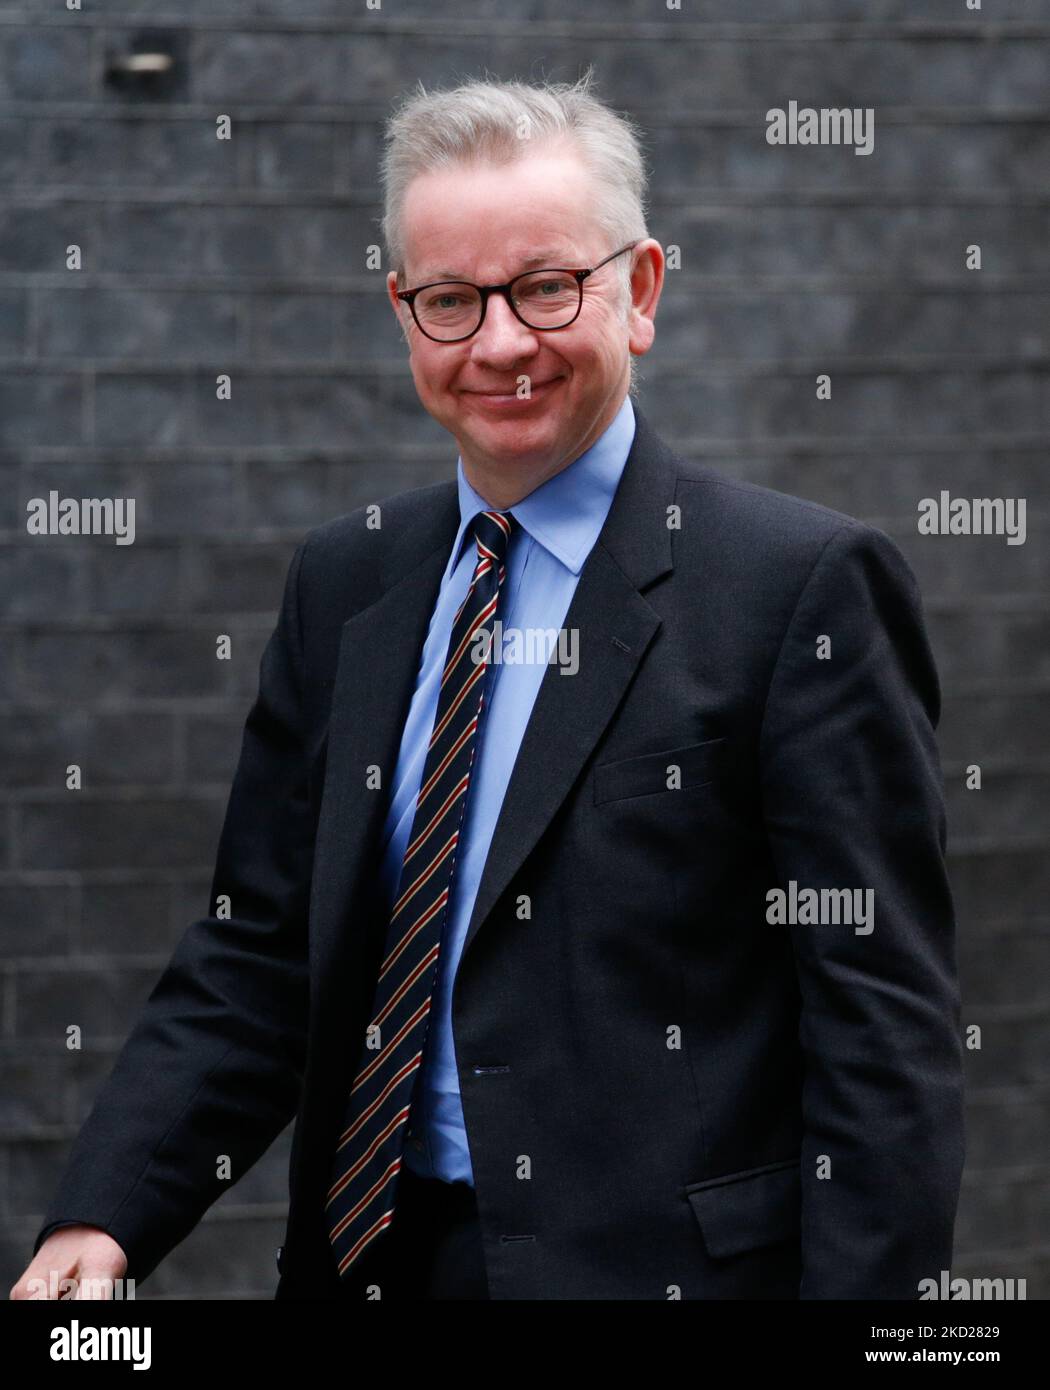 British Secretary of State for Levelling Up, Housing and Communities Michael Gove, Conservative Party MP for Surrey Heath, walks up Downing Street in London, England, on February 9, 2022. (Photo by David Cliff/NurPhoto) Stock Photo